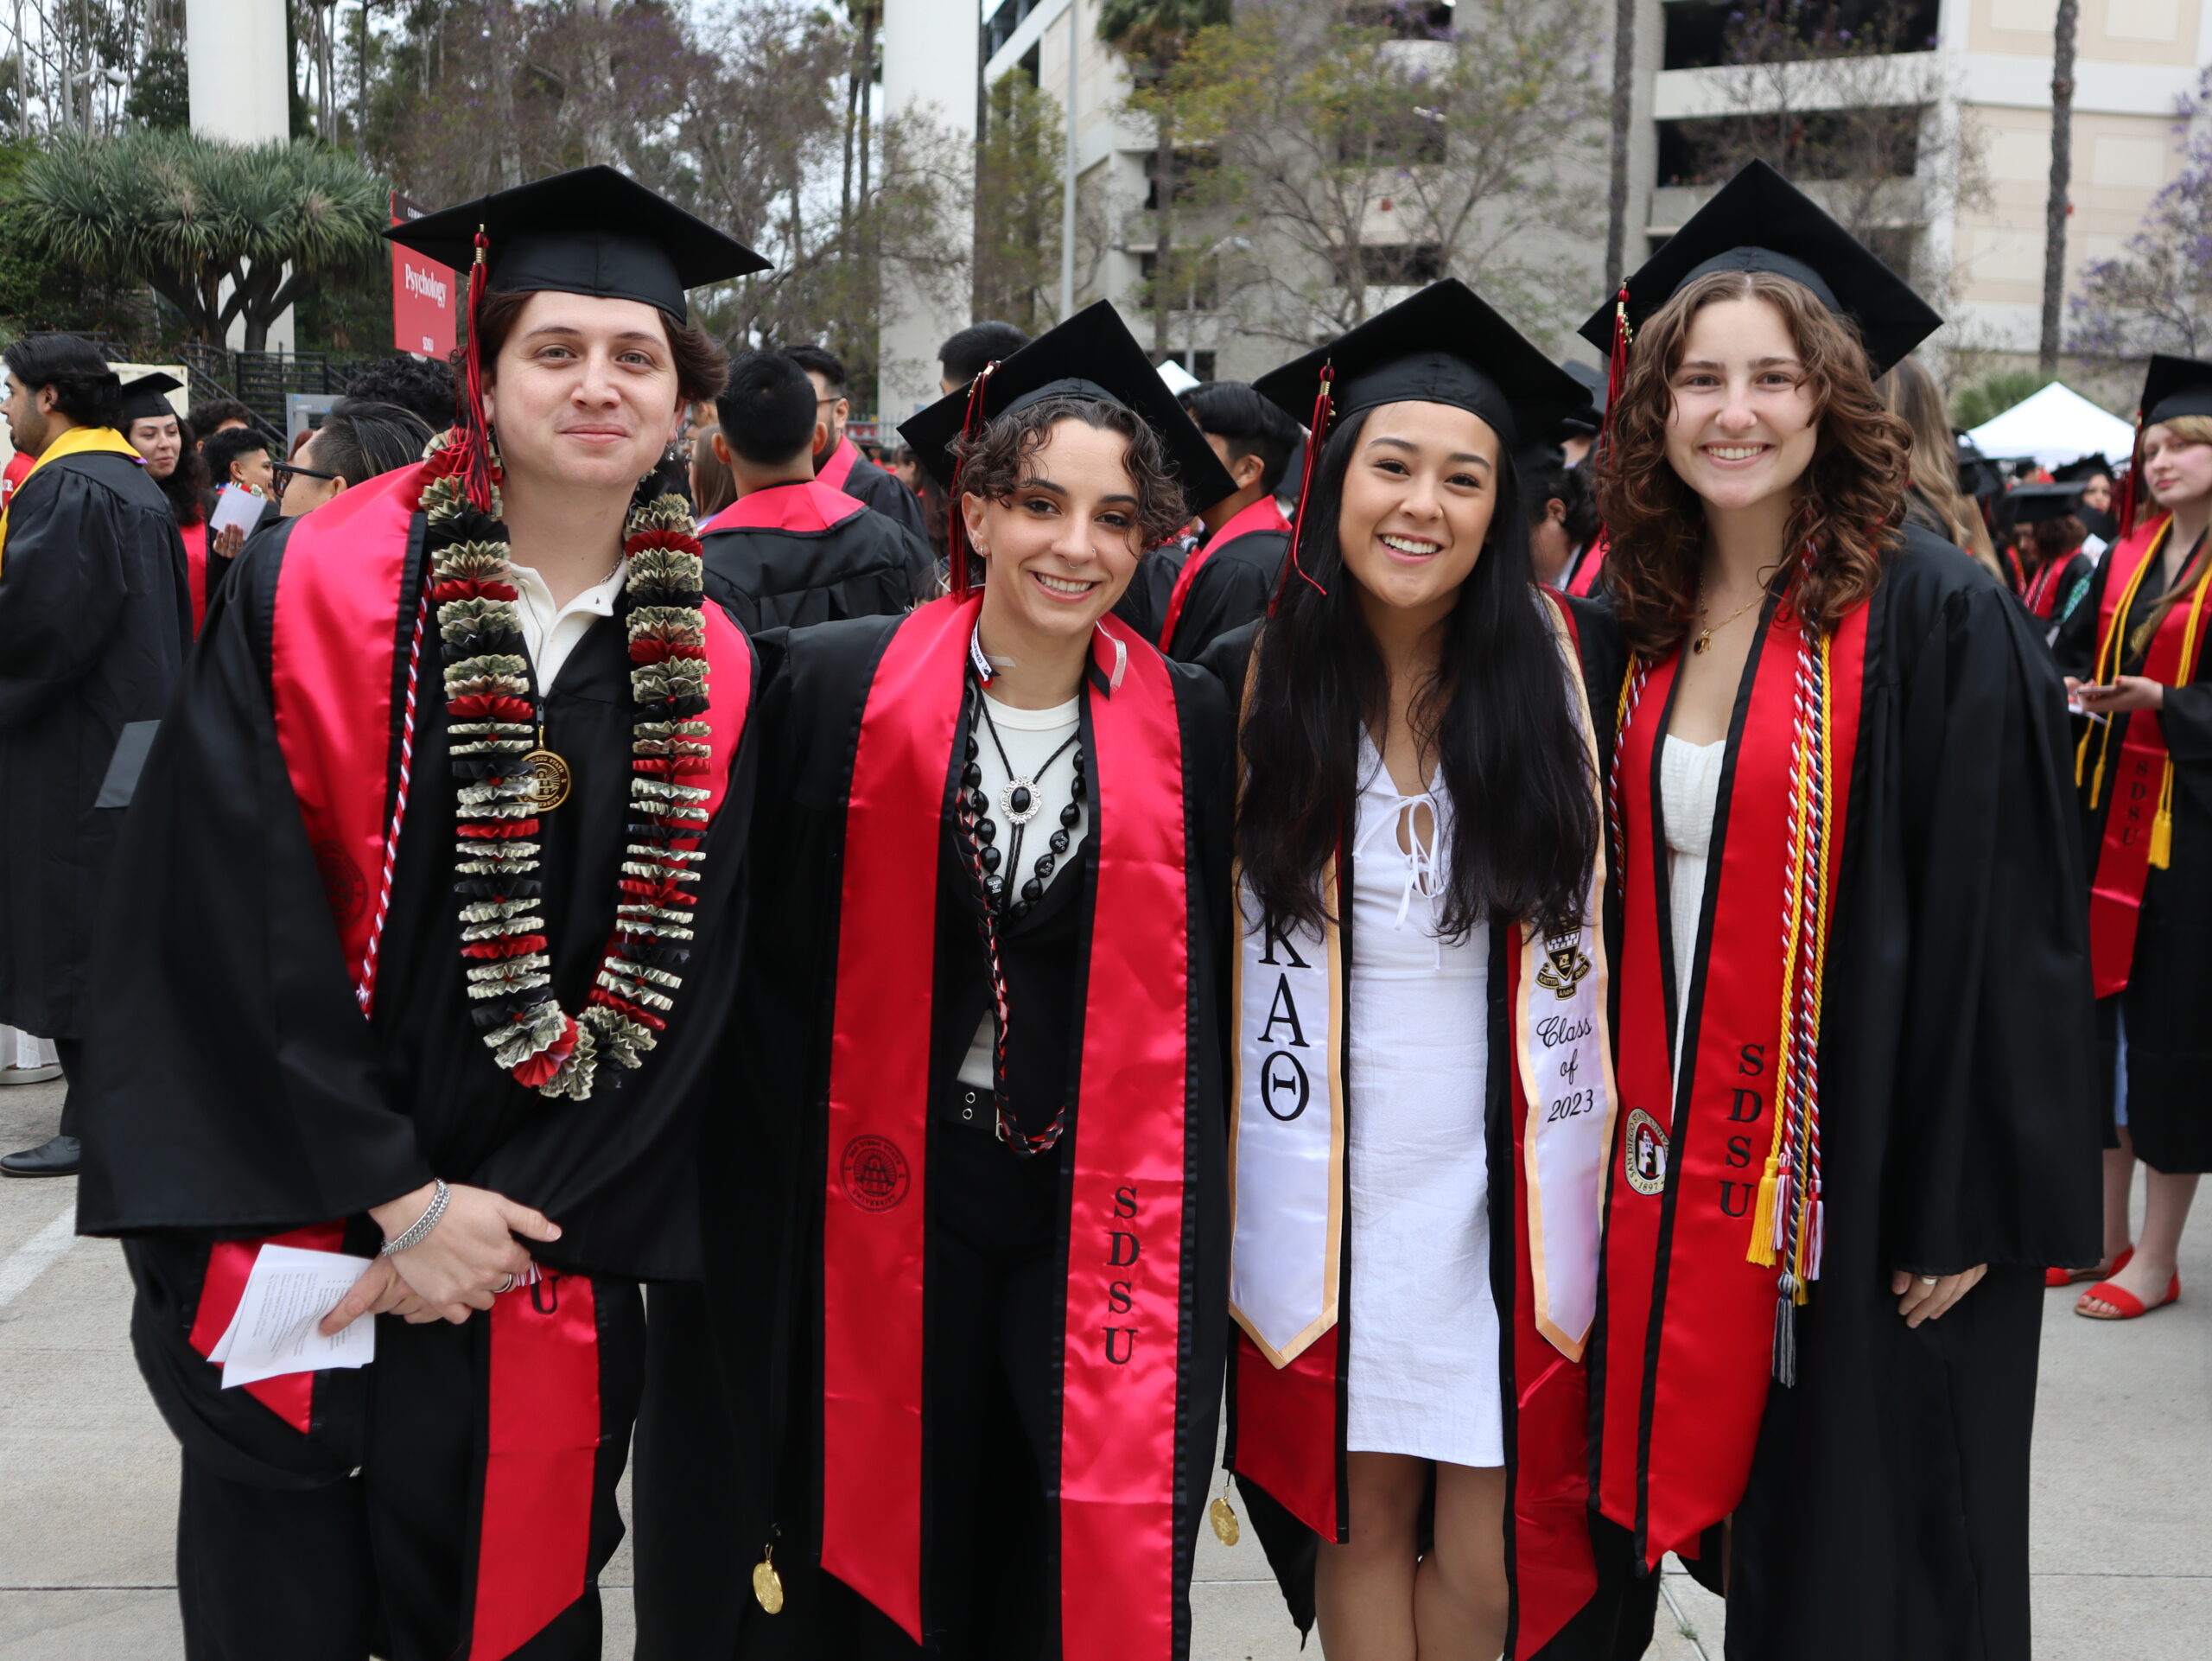 College of Sciences graduates pose for a photo in cap and gown